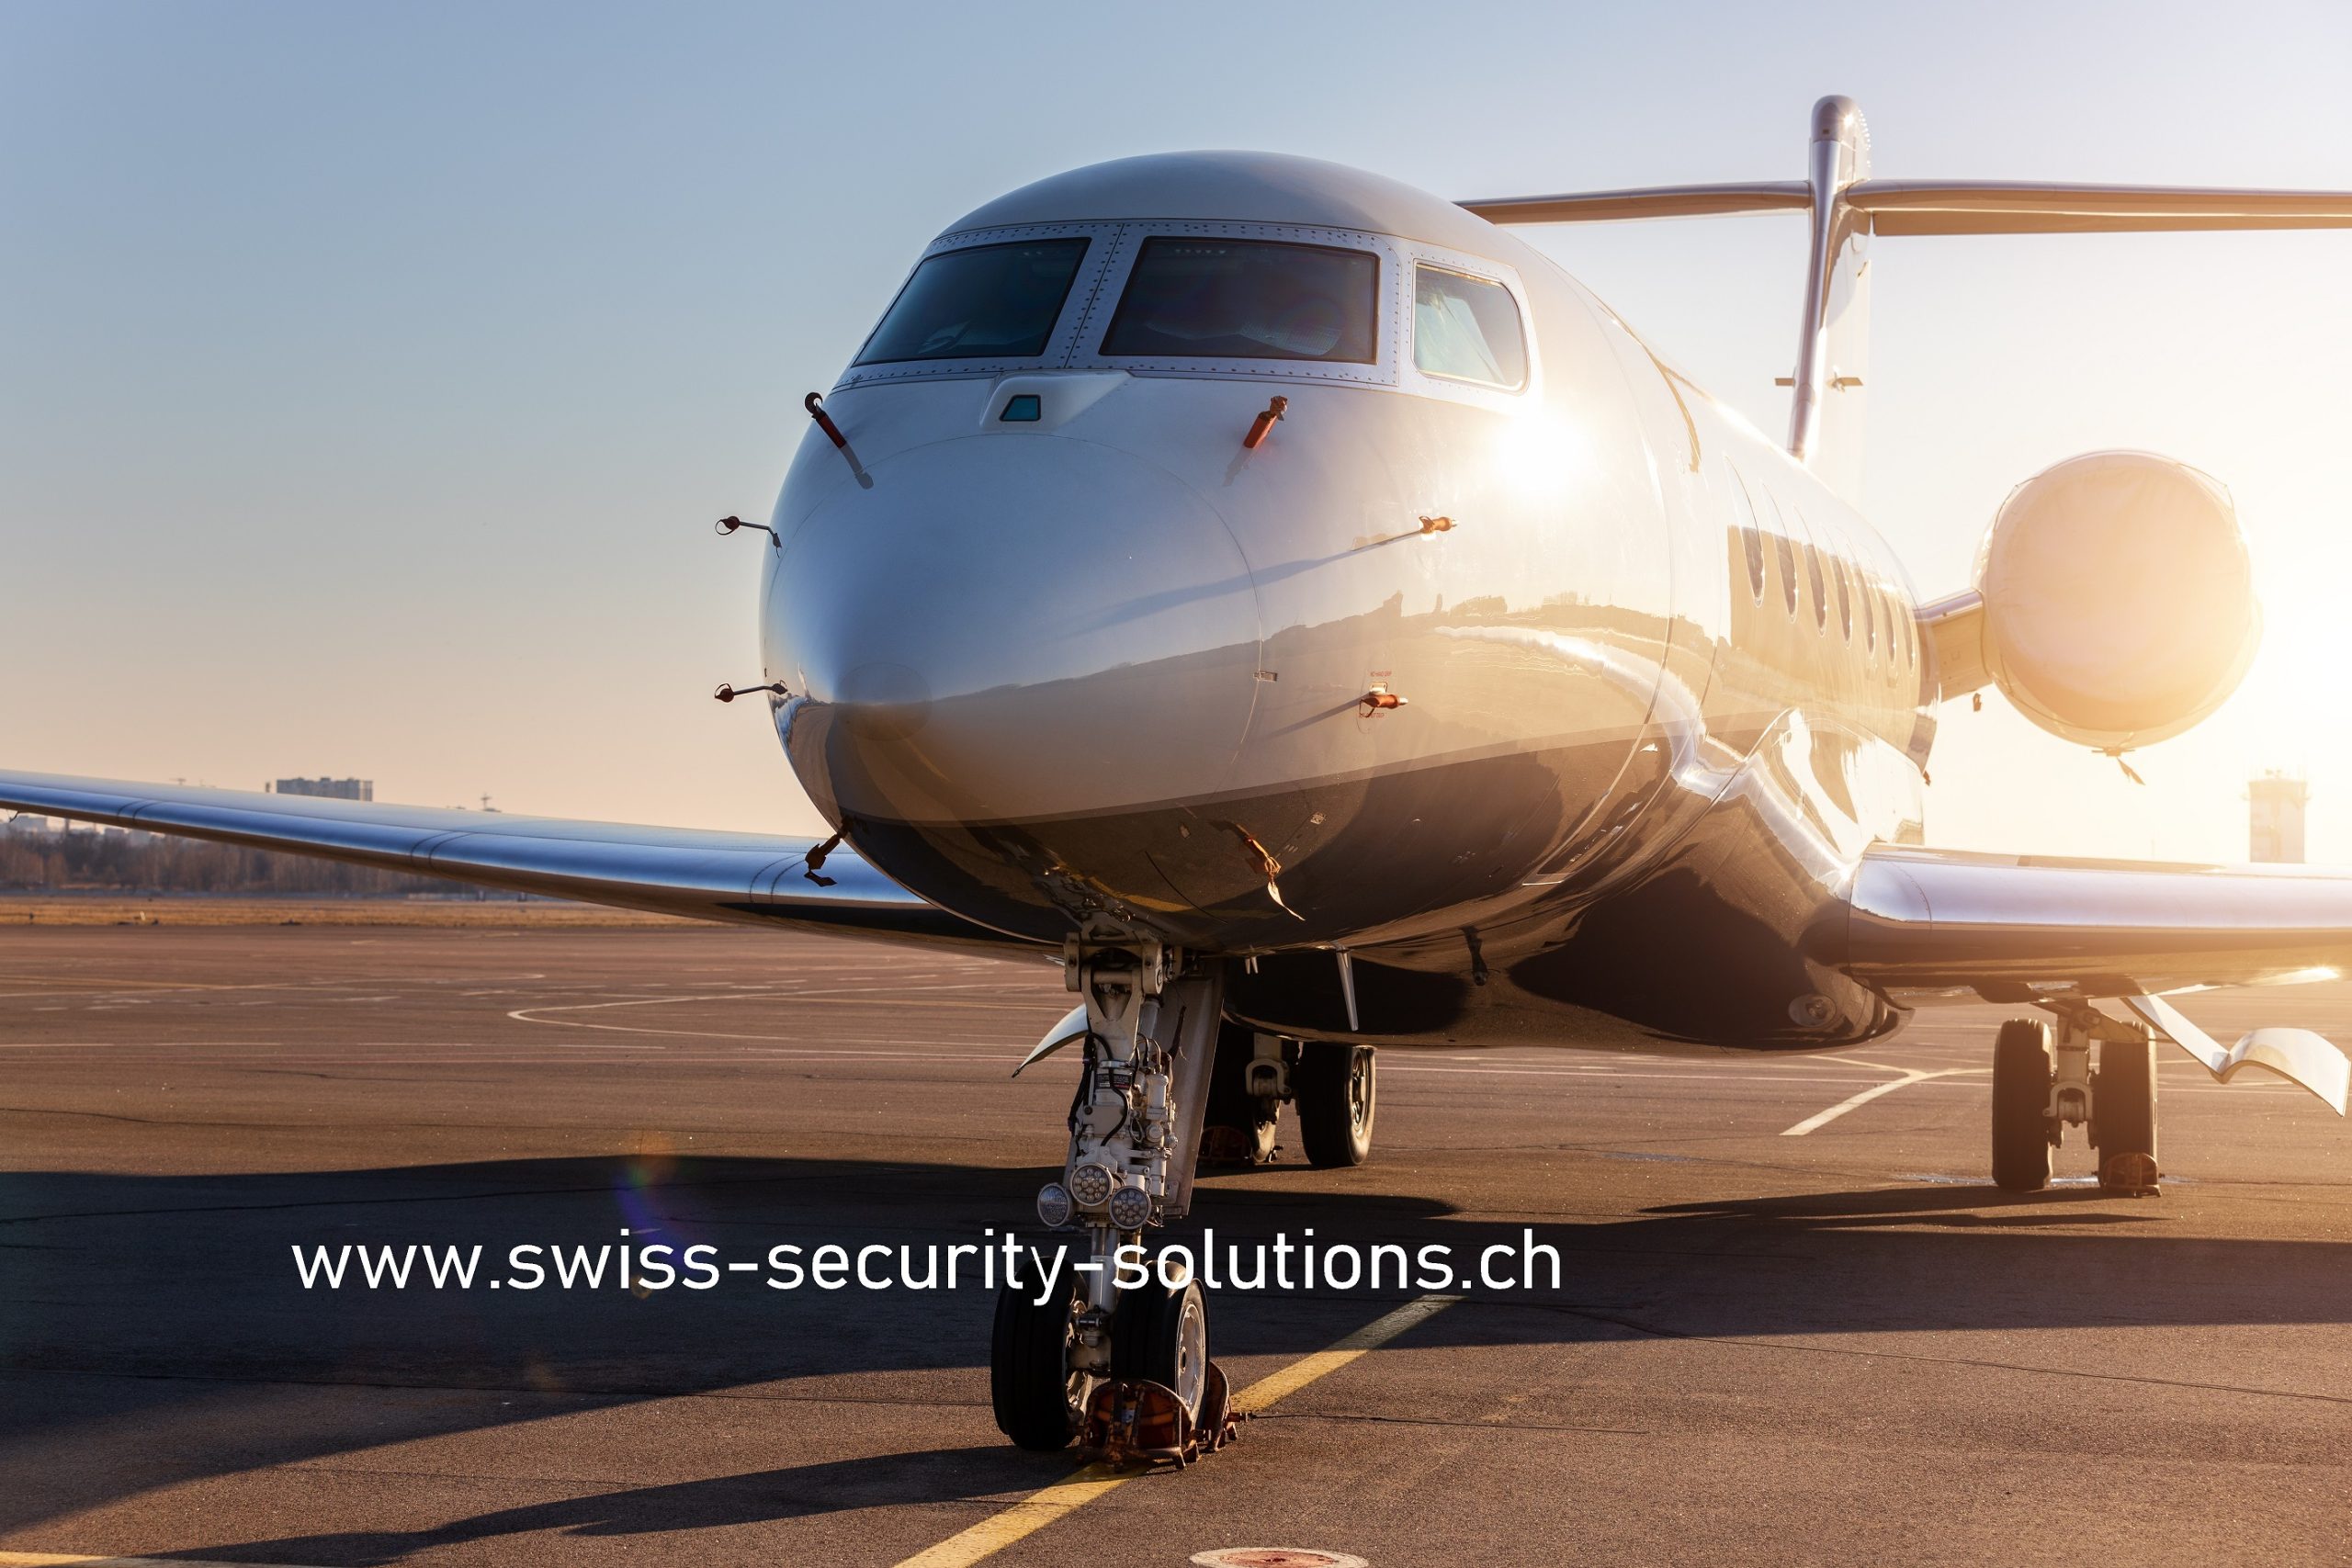 Swiss Security Solutions